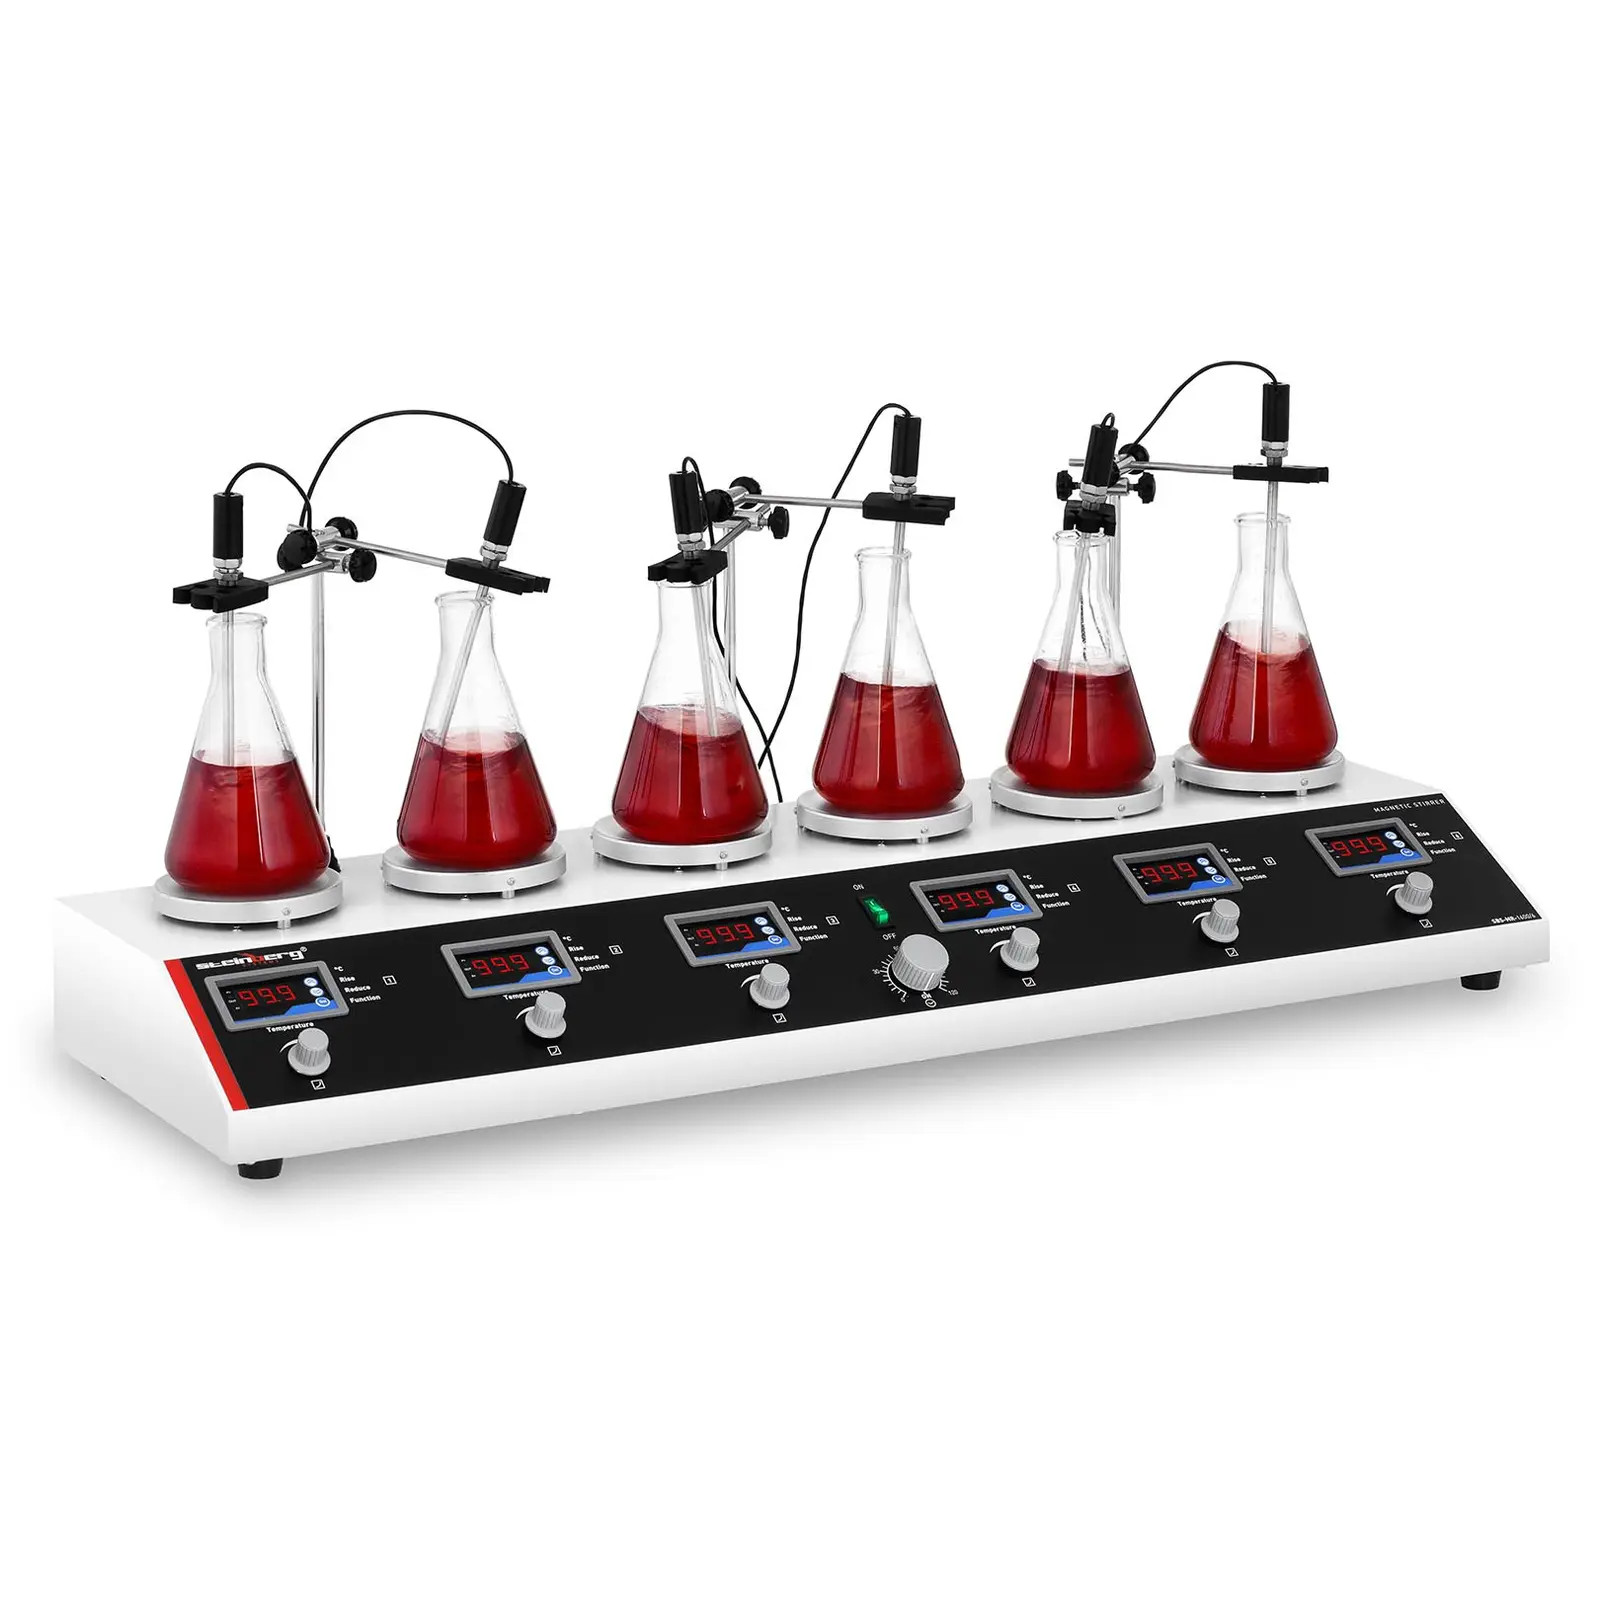 Magnetic Stirrer with a 6-Unit Hotplate